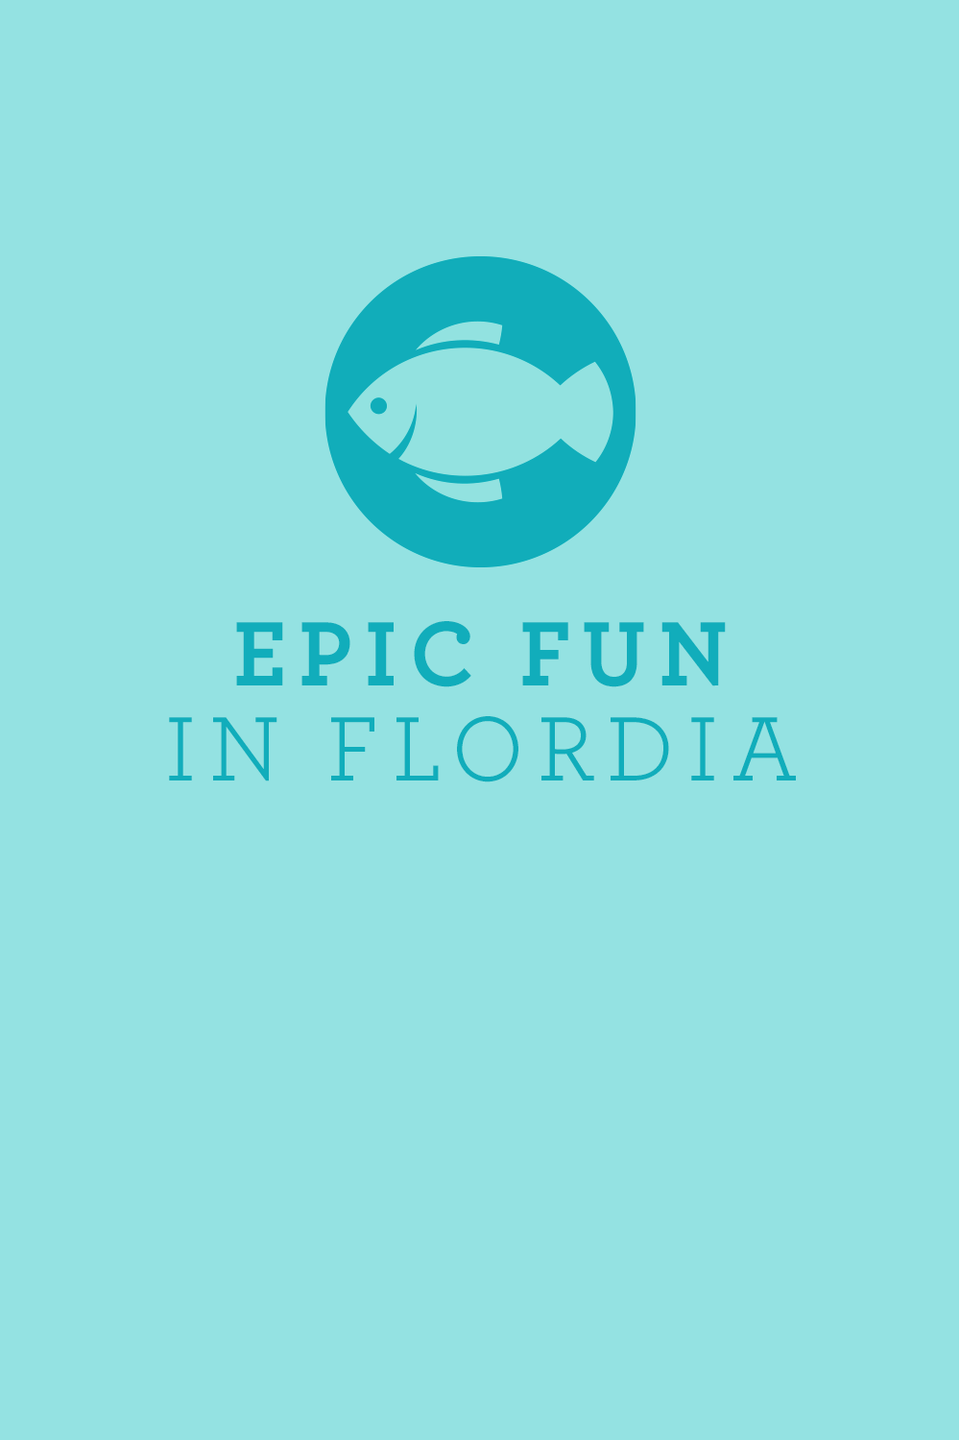 a slide that says epic fun in florida with an icon of a fish